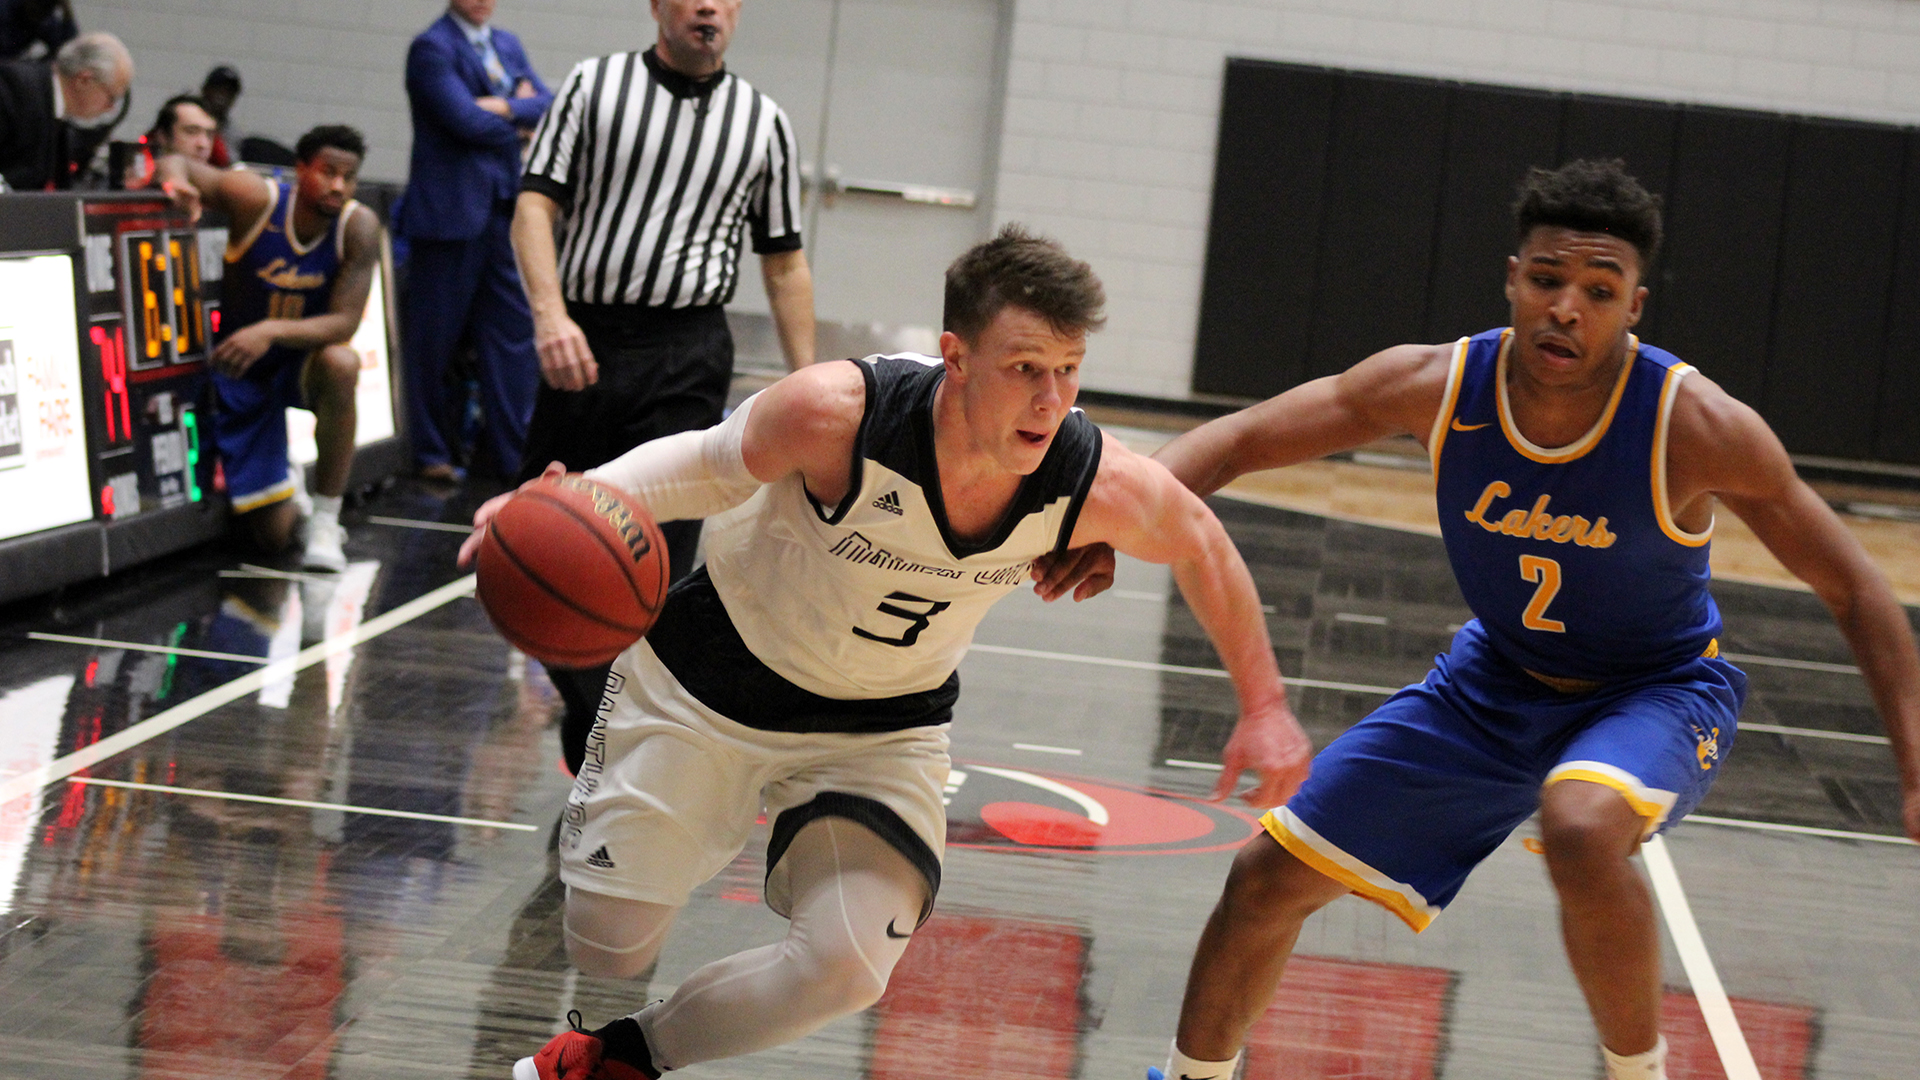 Davenport wins up-tempo game against Great Lakes Christian 105-77